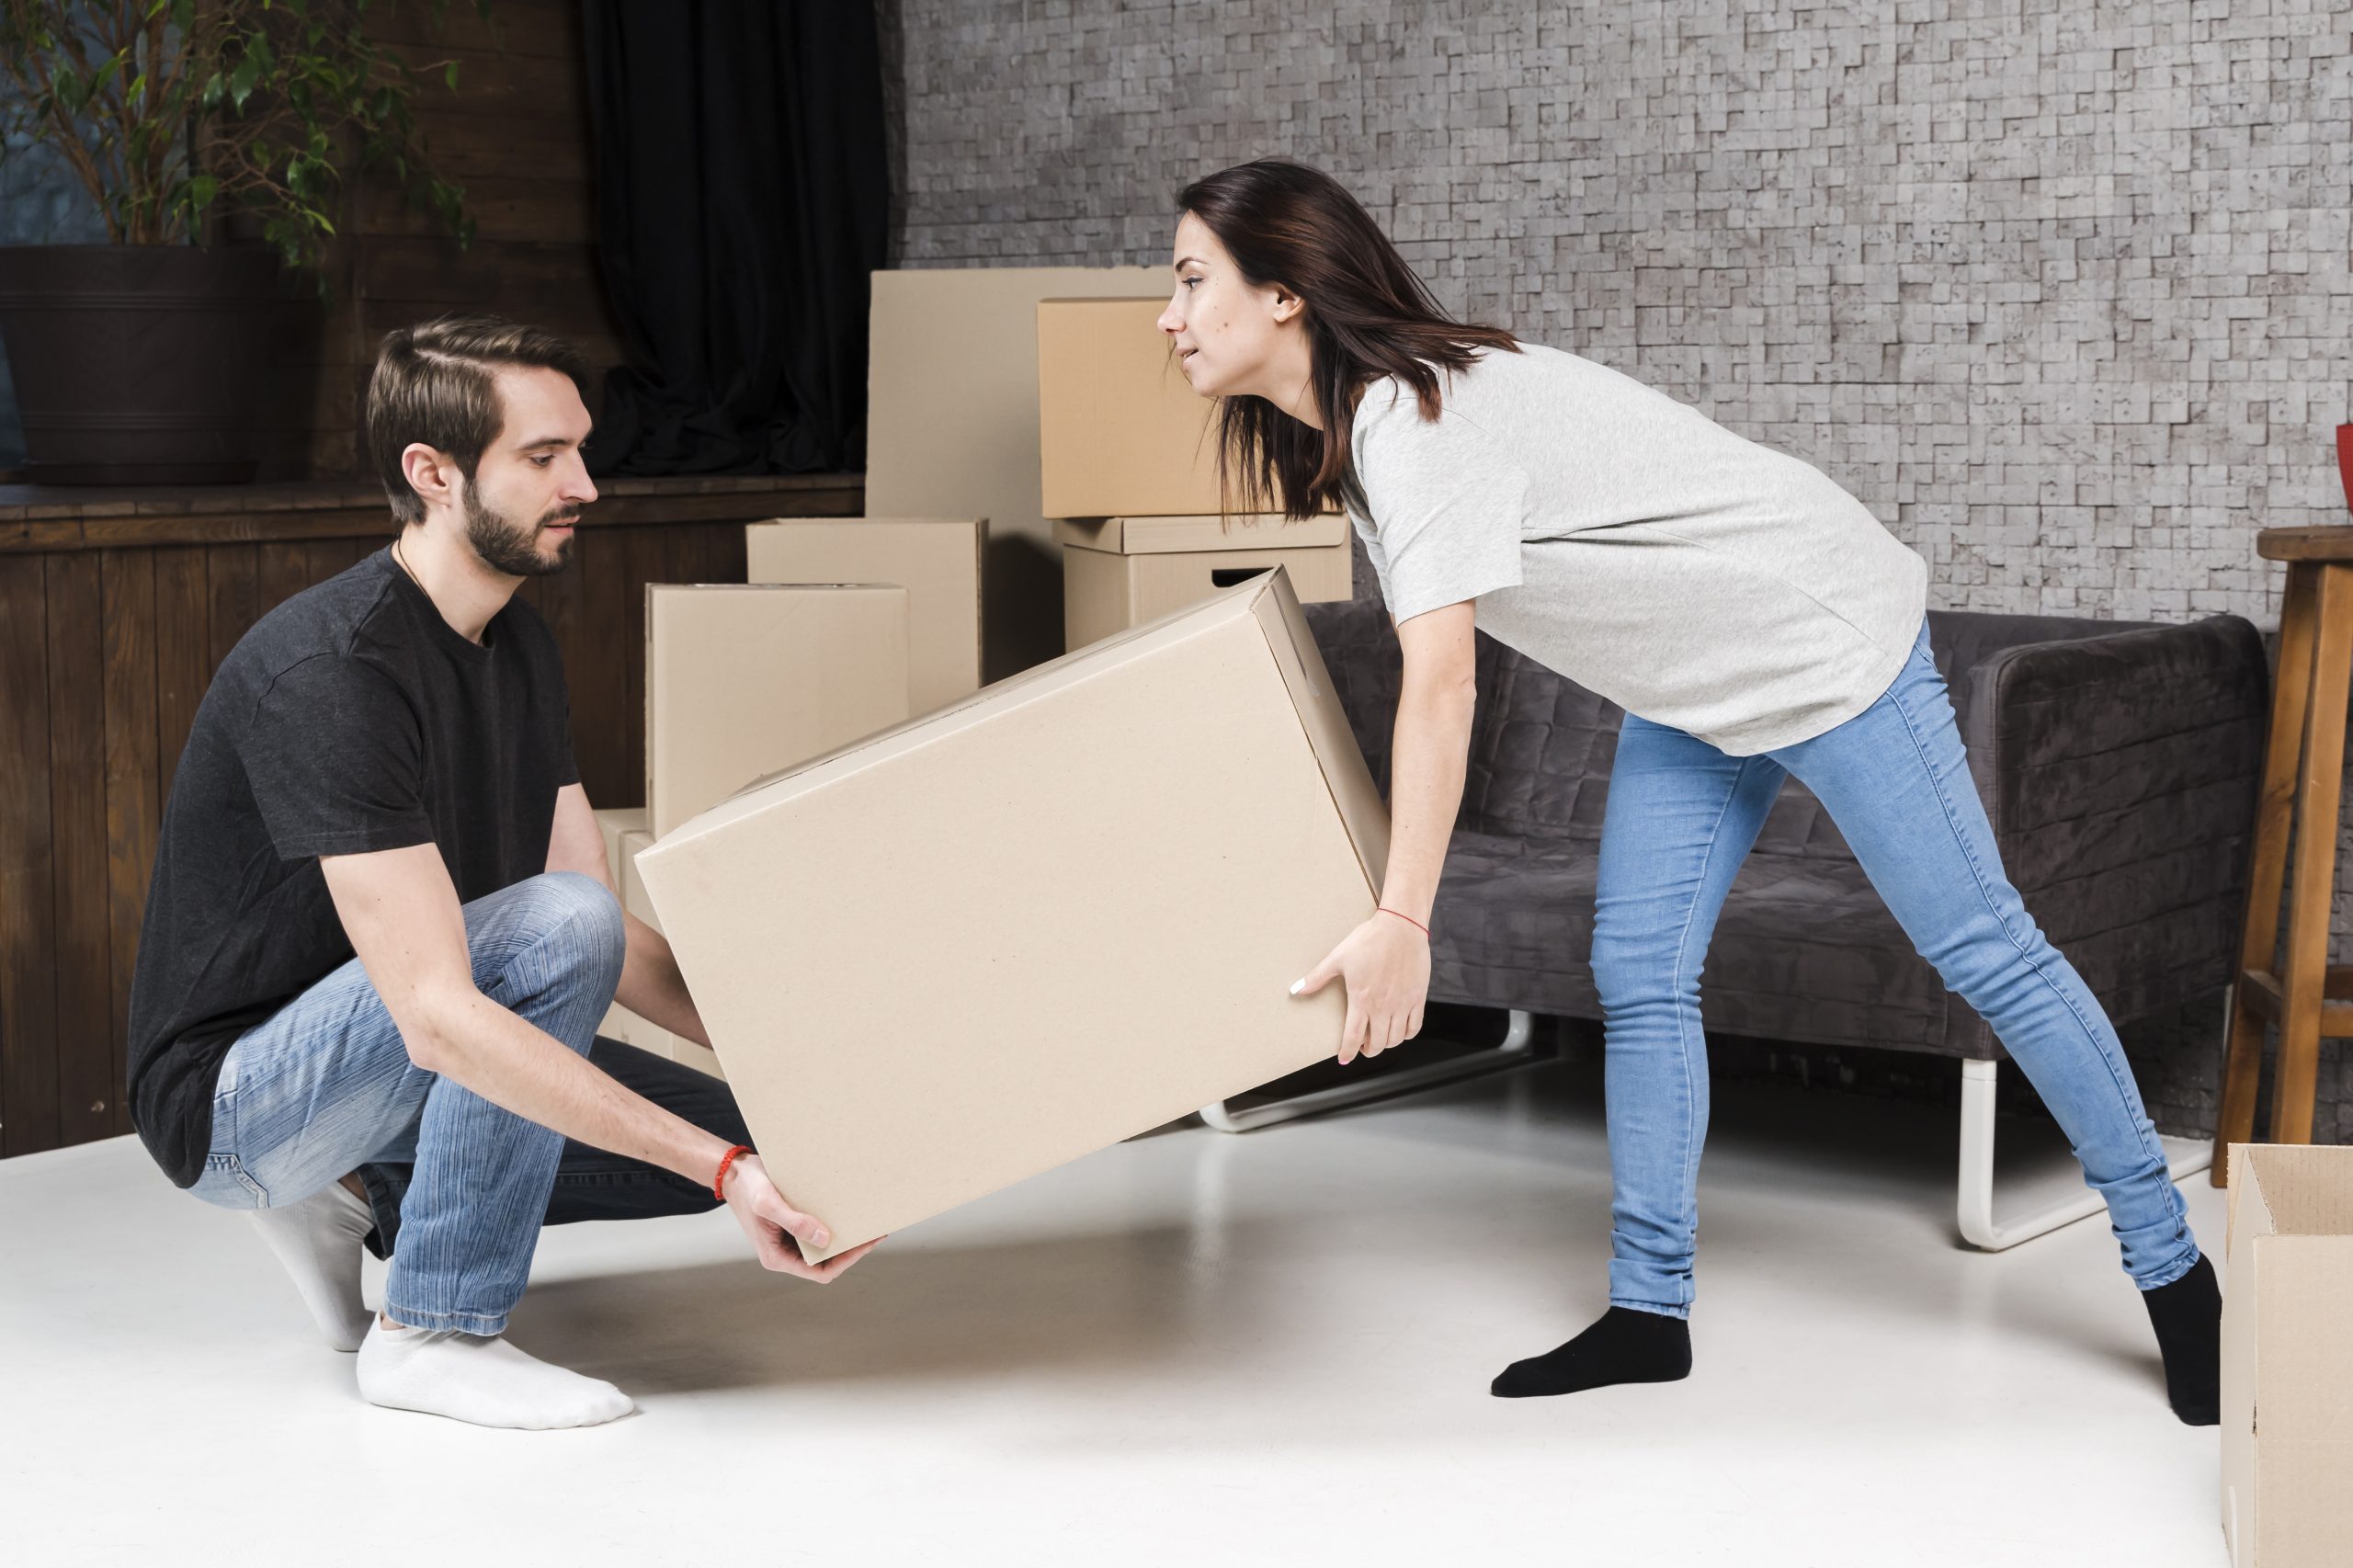 How to safely pack your belongings when moving house